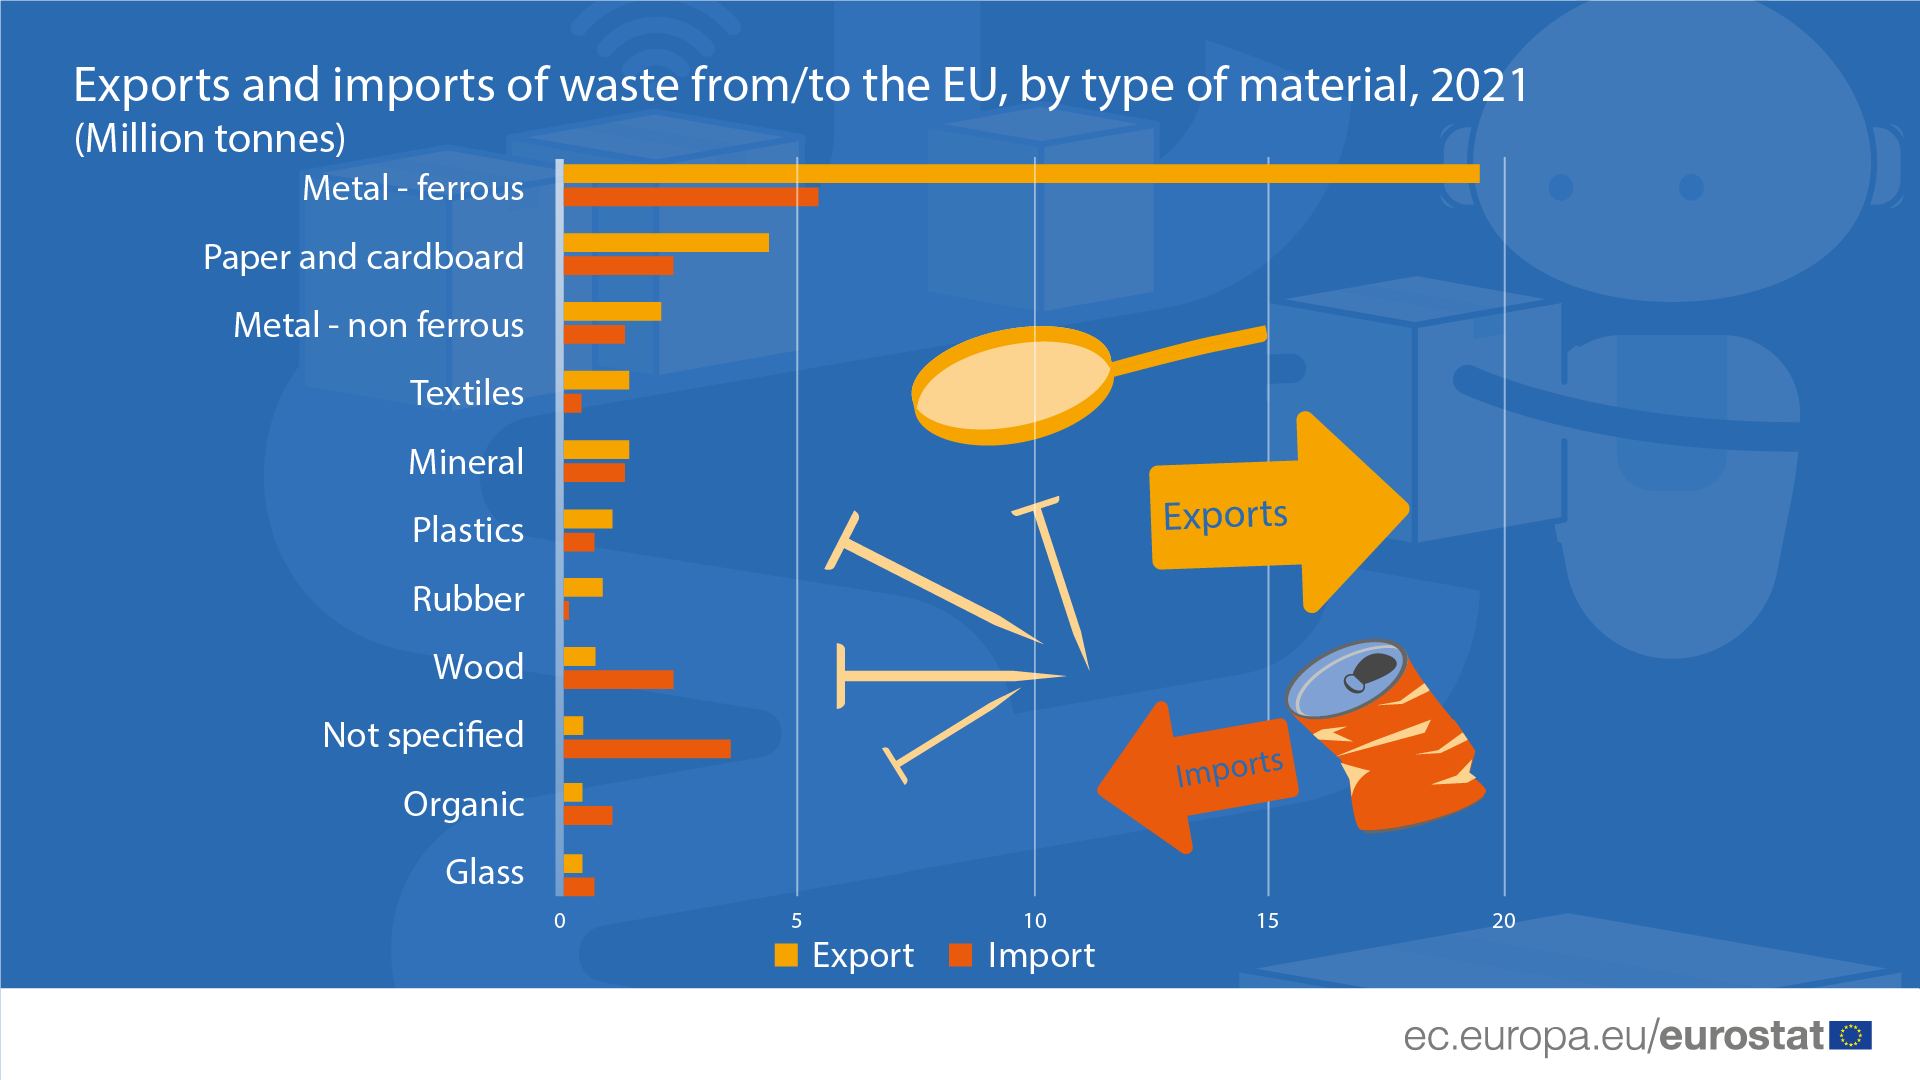 Bar chart: Exports and imports of waste from/to the EU, by type of material (Million tonnes), 2021